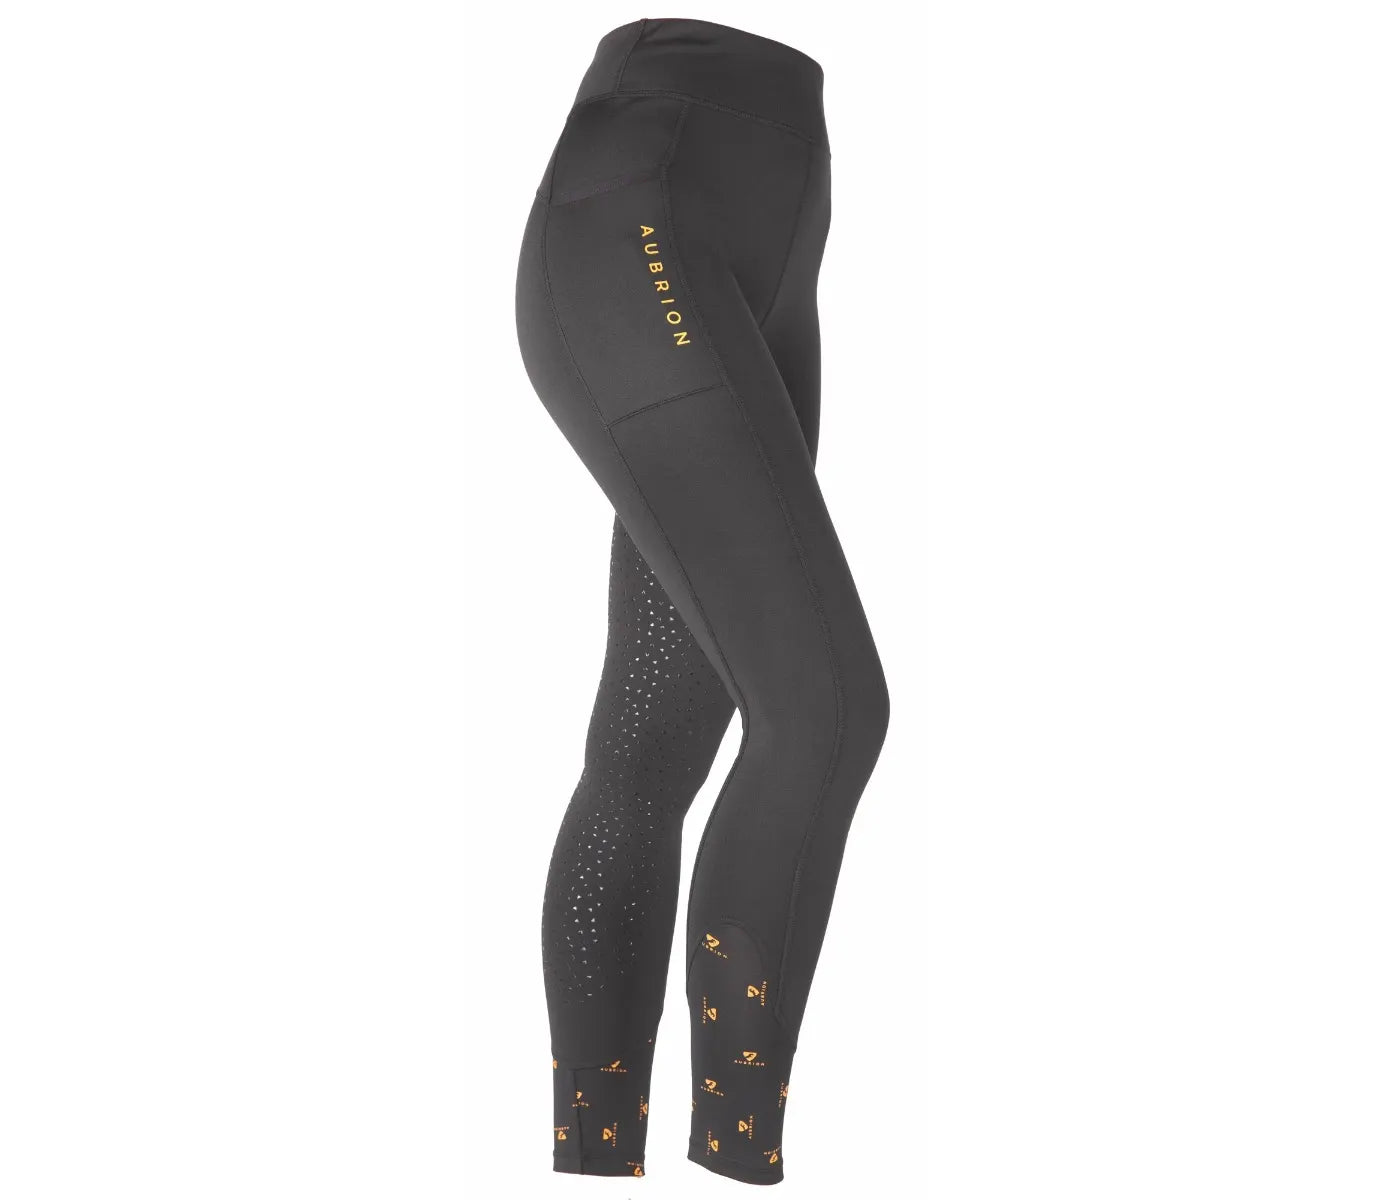 Shires Aubrion Porter Winter Riding Tights - Jet Black - Size Small